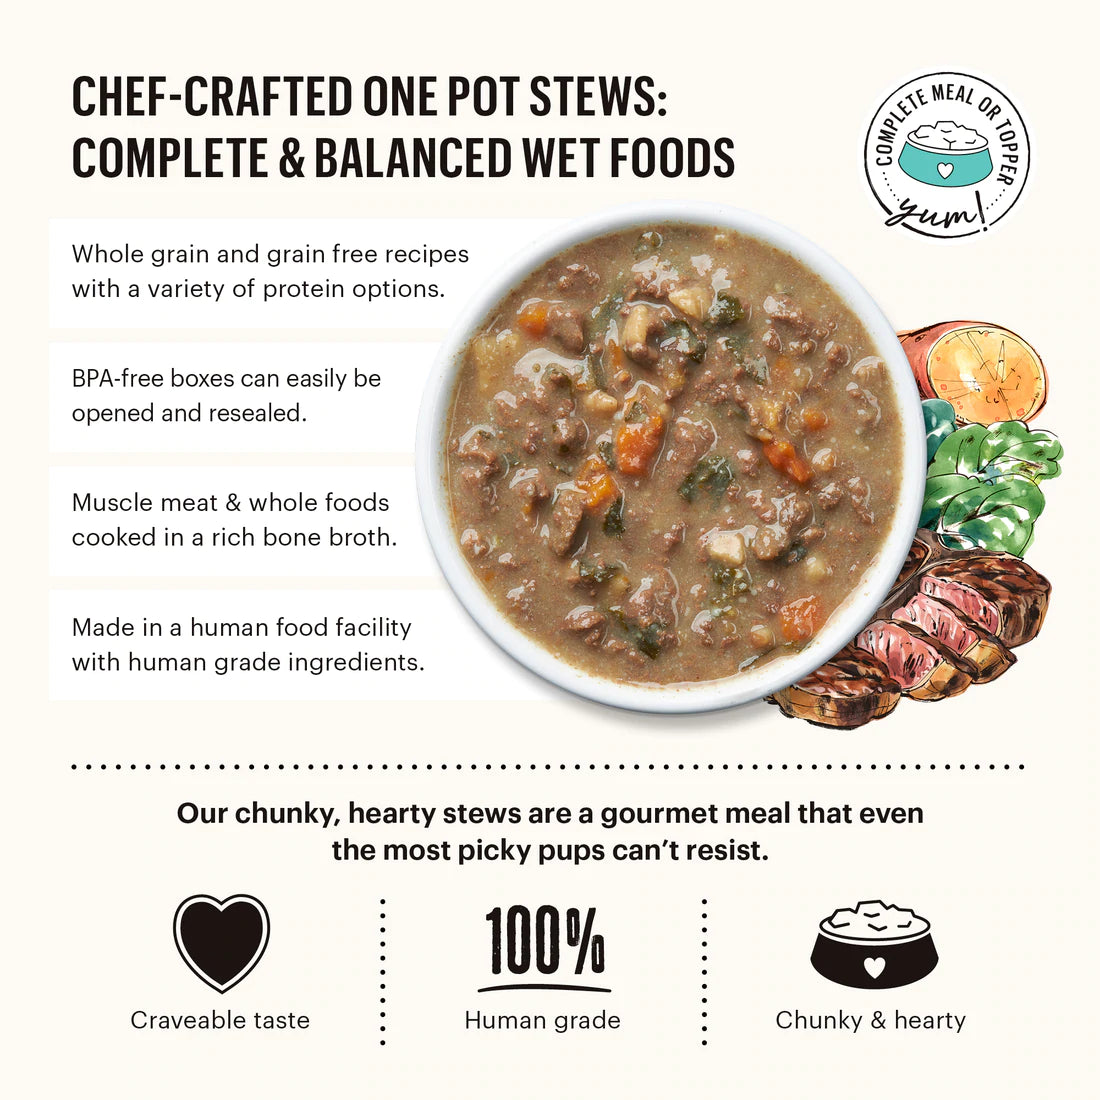 The Honest Kitchen One Pot Stew Braised Beef & Lamb Stew with Green Beans & Sweet Potatoes - 10.5 oz